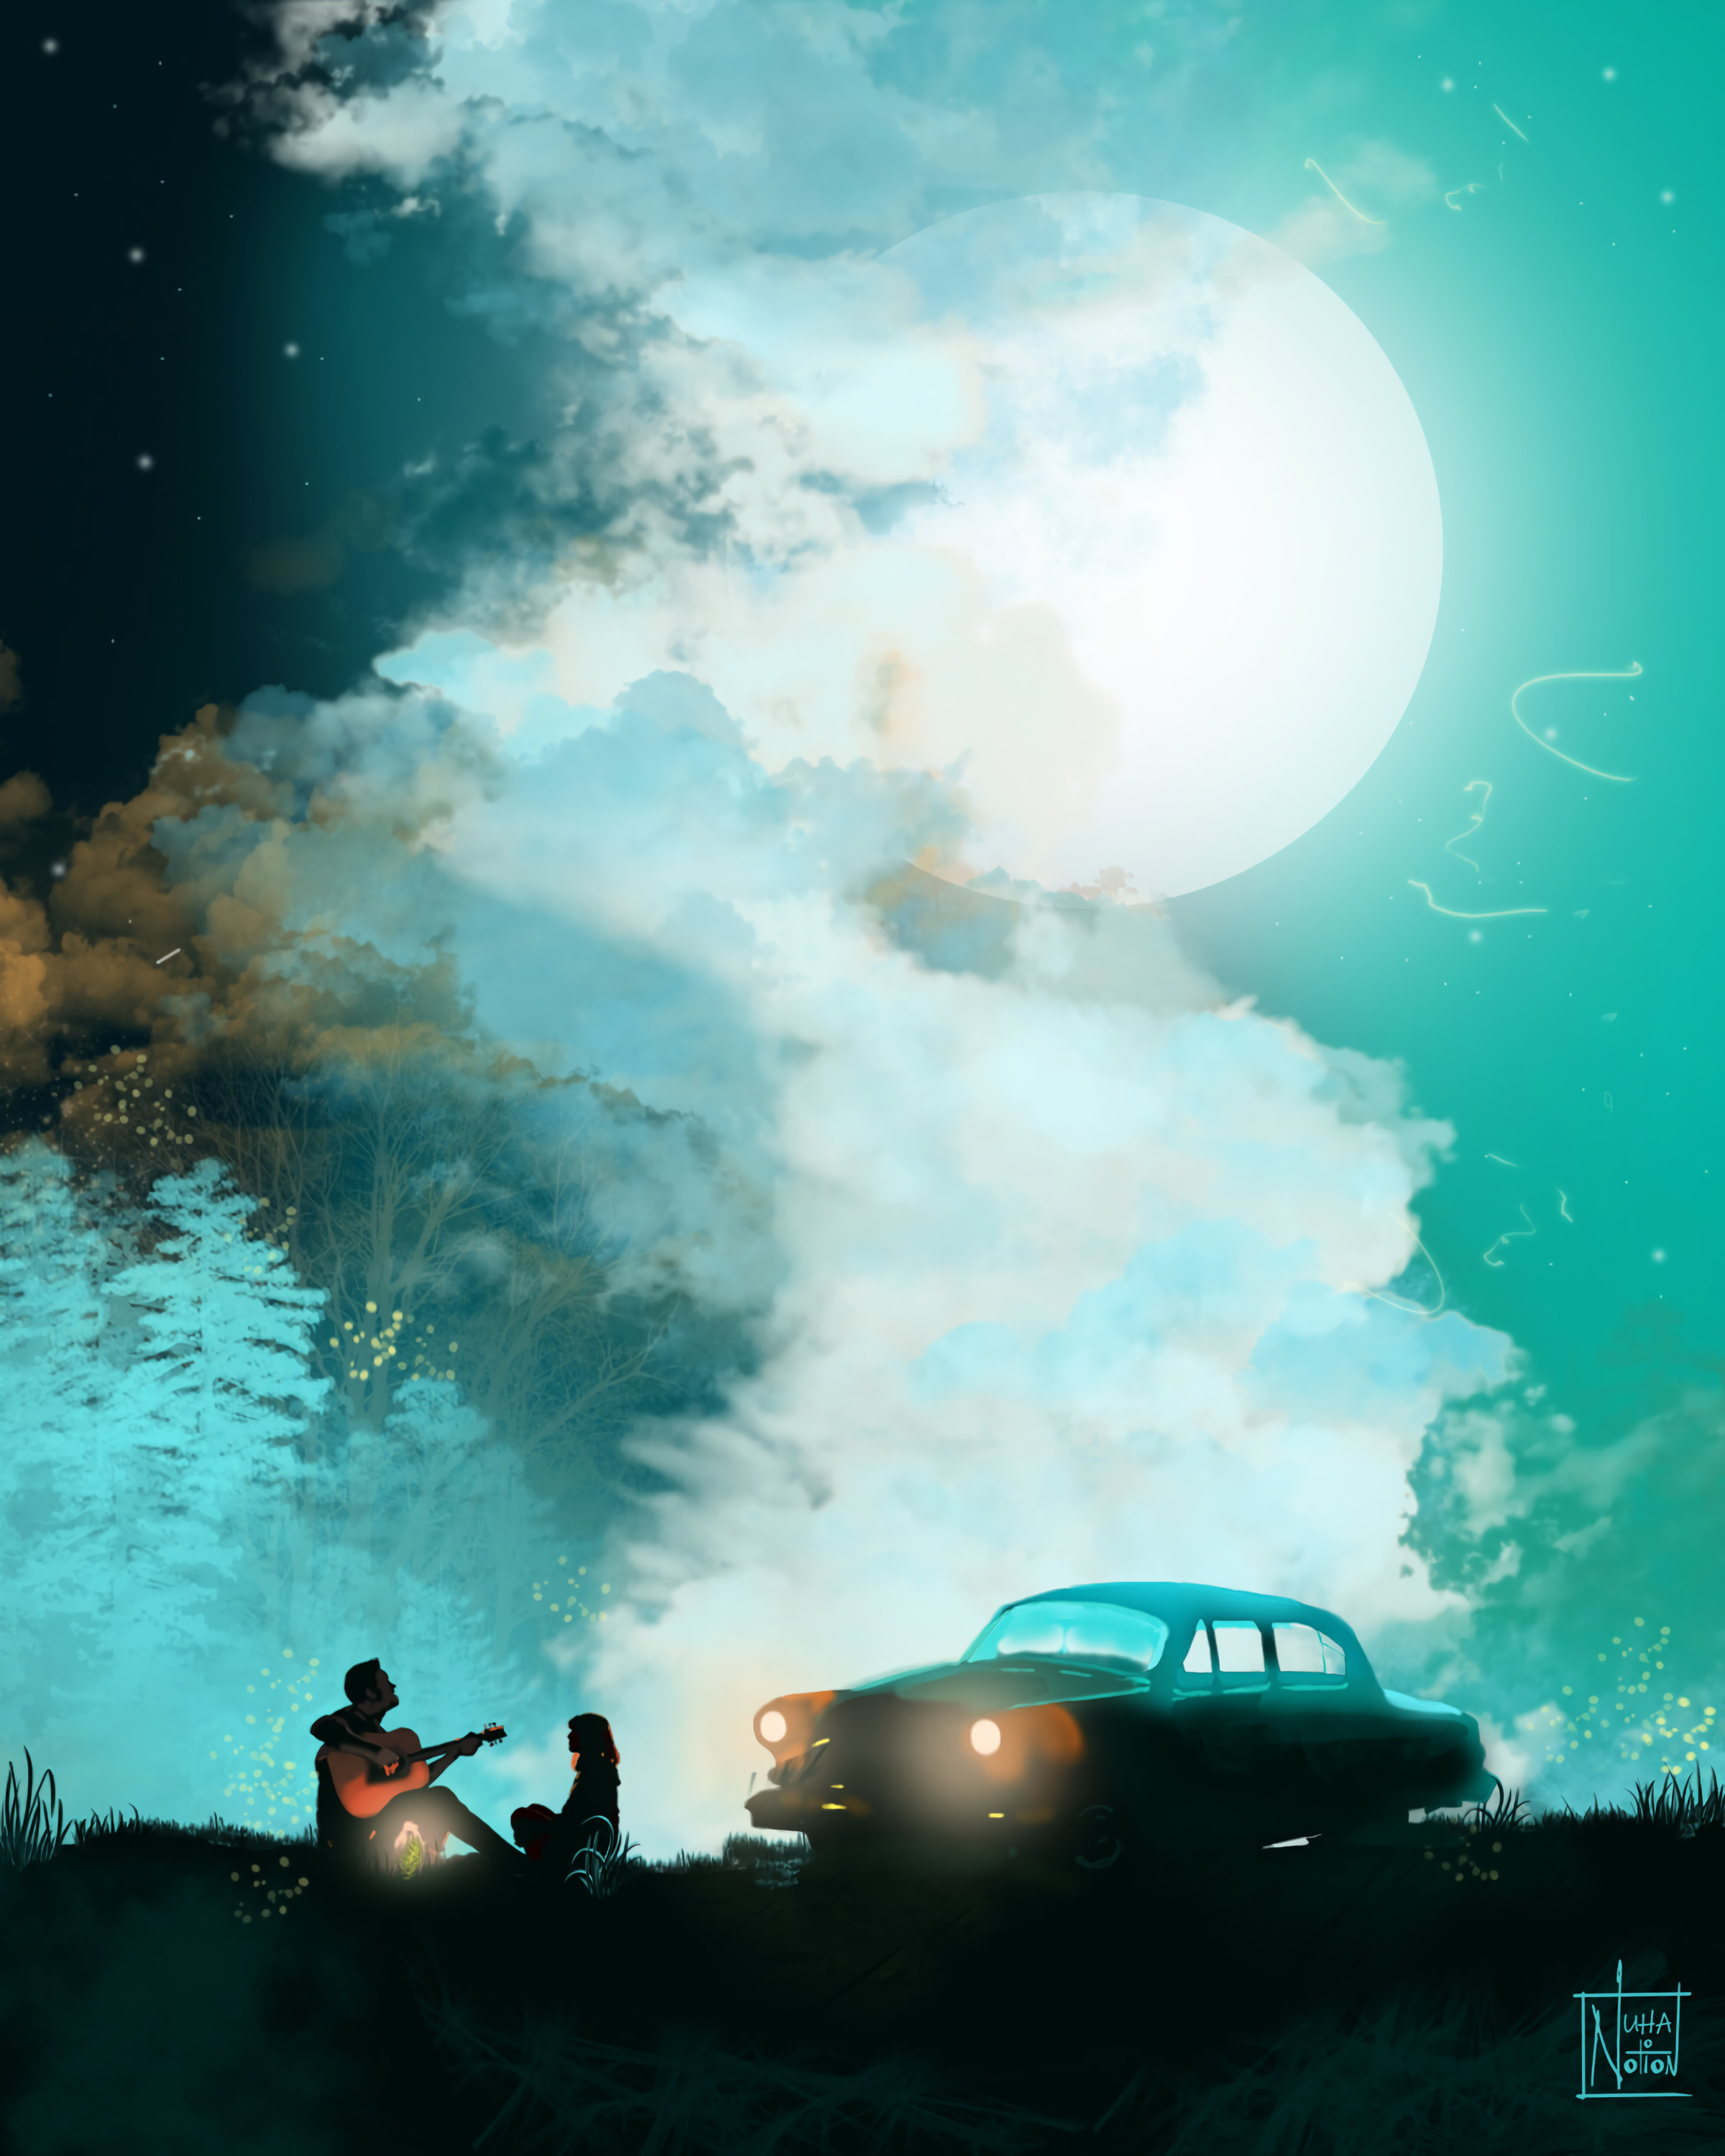 android art, guitar, night, moon, silhouettes, car